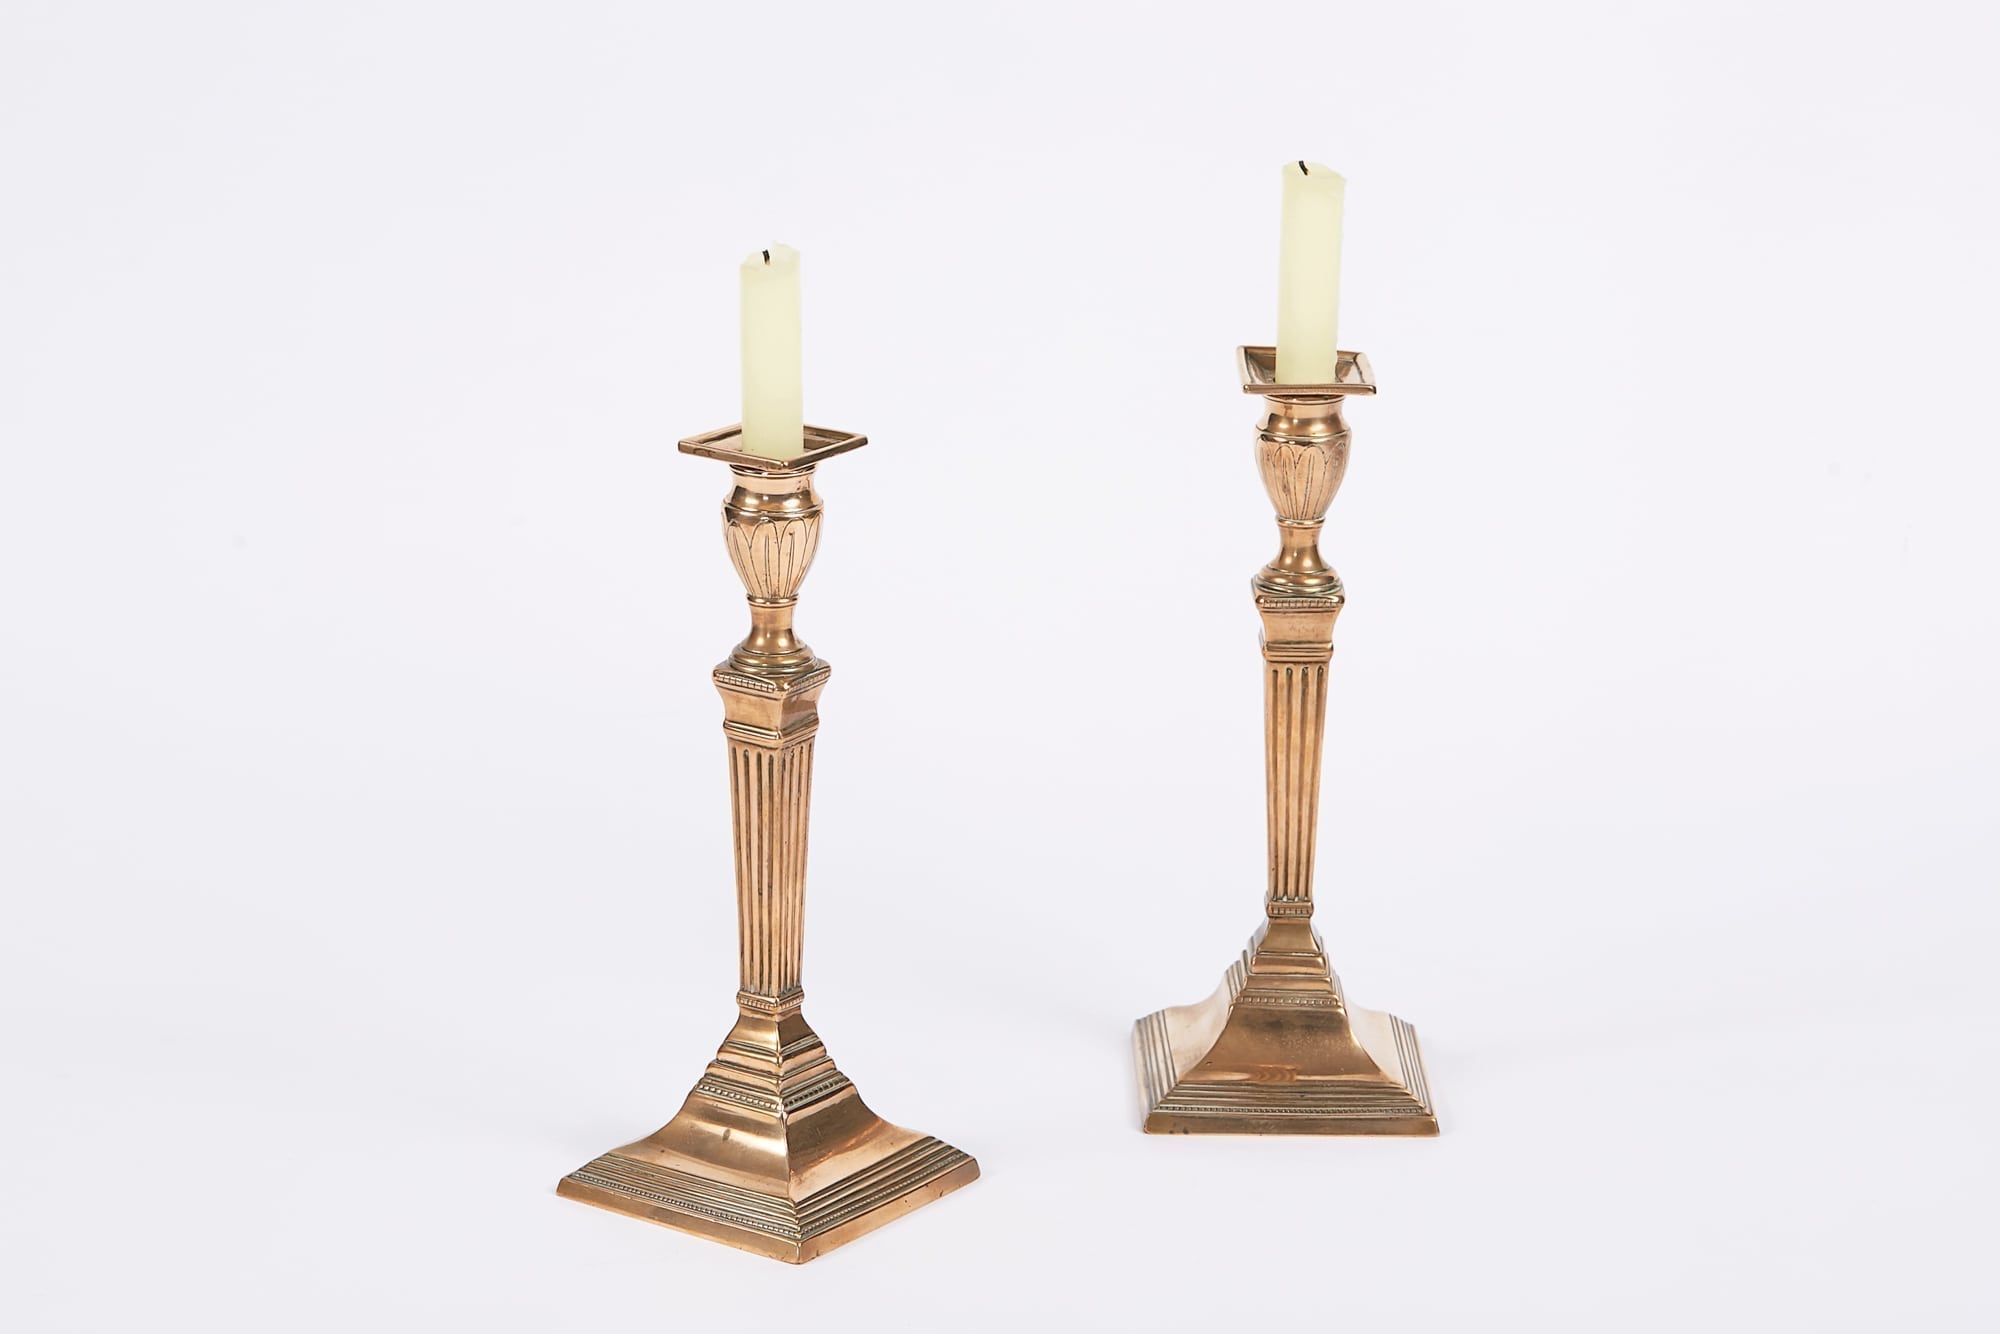 Early 18th C. Brass Candlestick